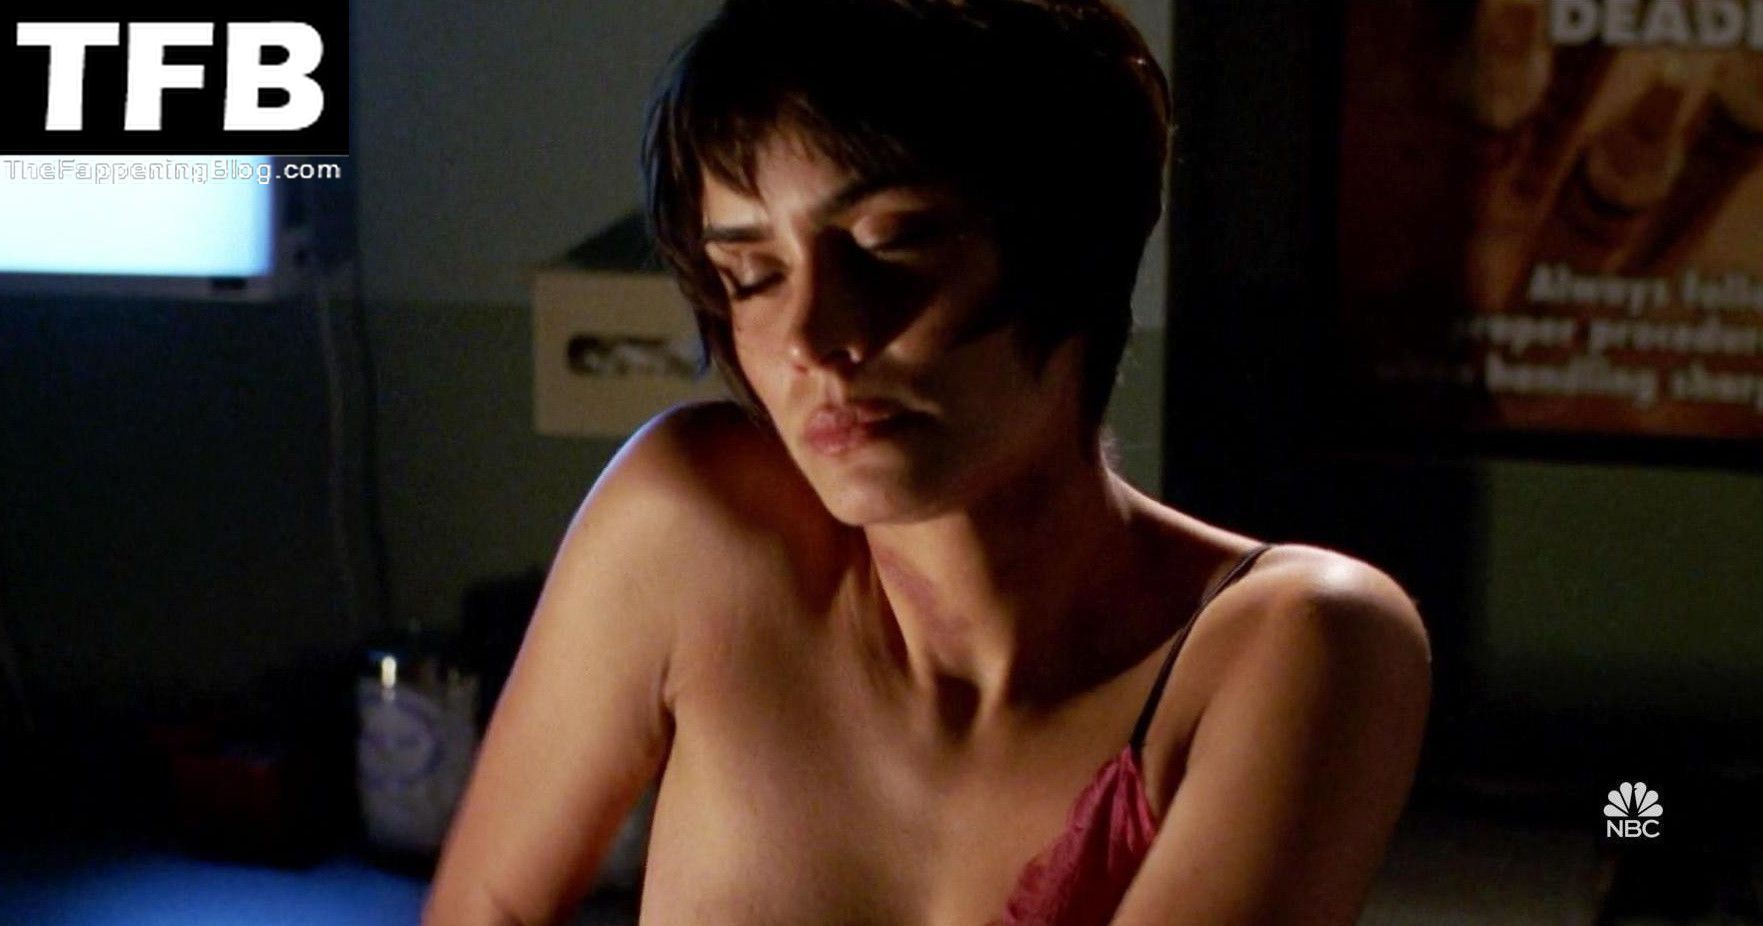 Shannyn Sossamon Nude And Sexy Collection 9 Photos Thefappening